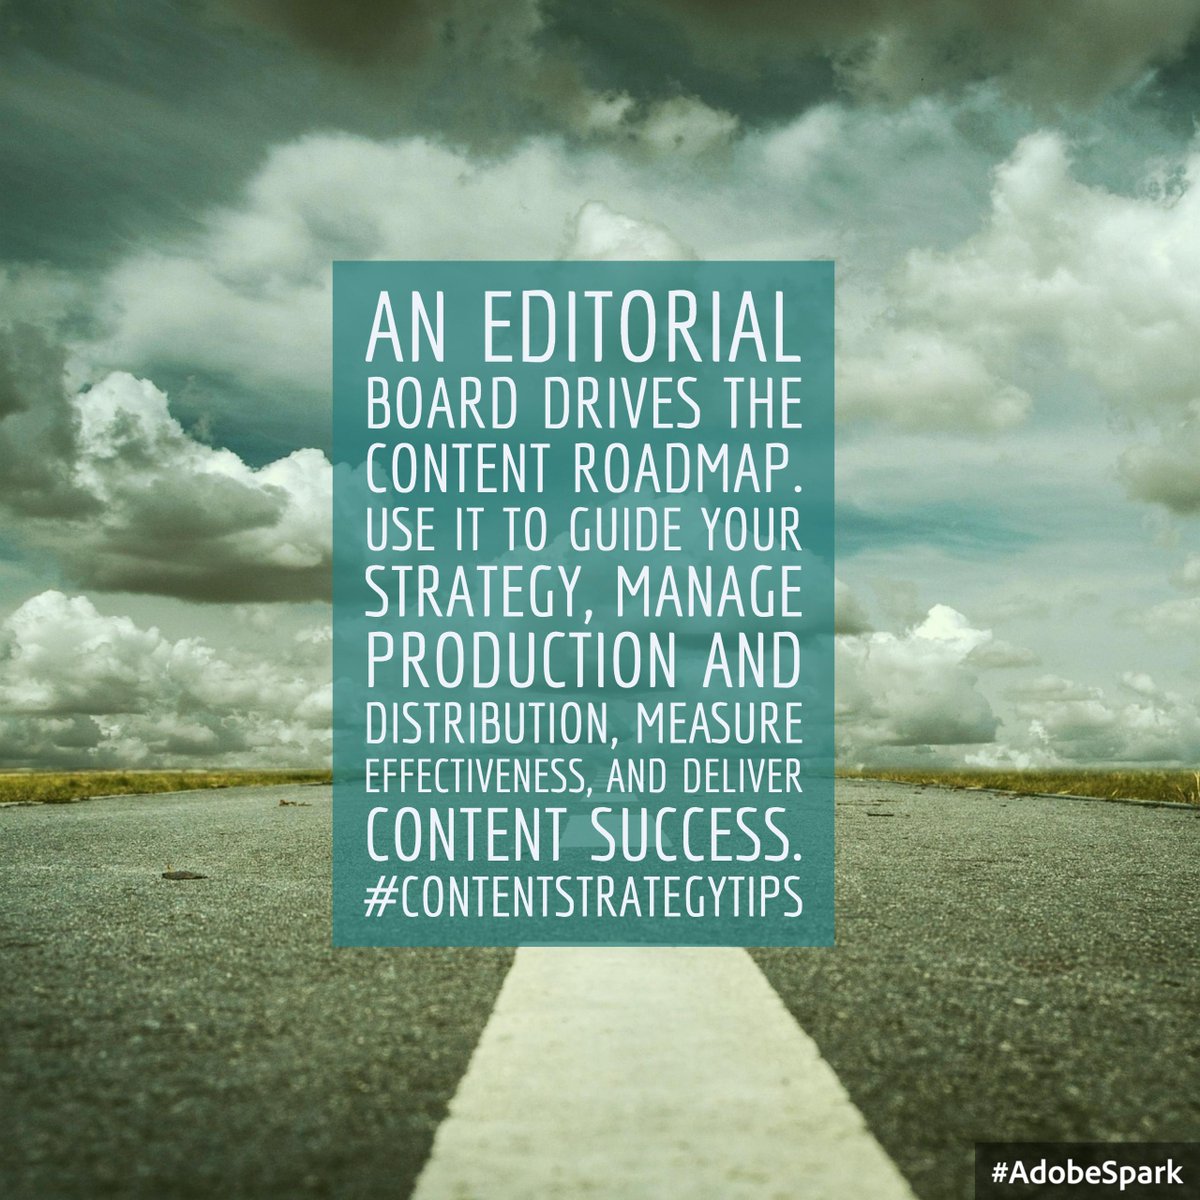 Build a strong editorial board to govern your content marketing approach #thinklikeapublisher #contentstrategytips